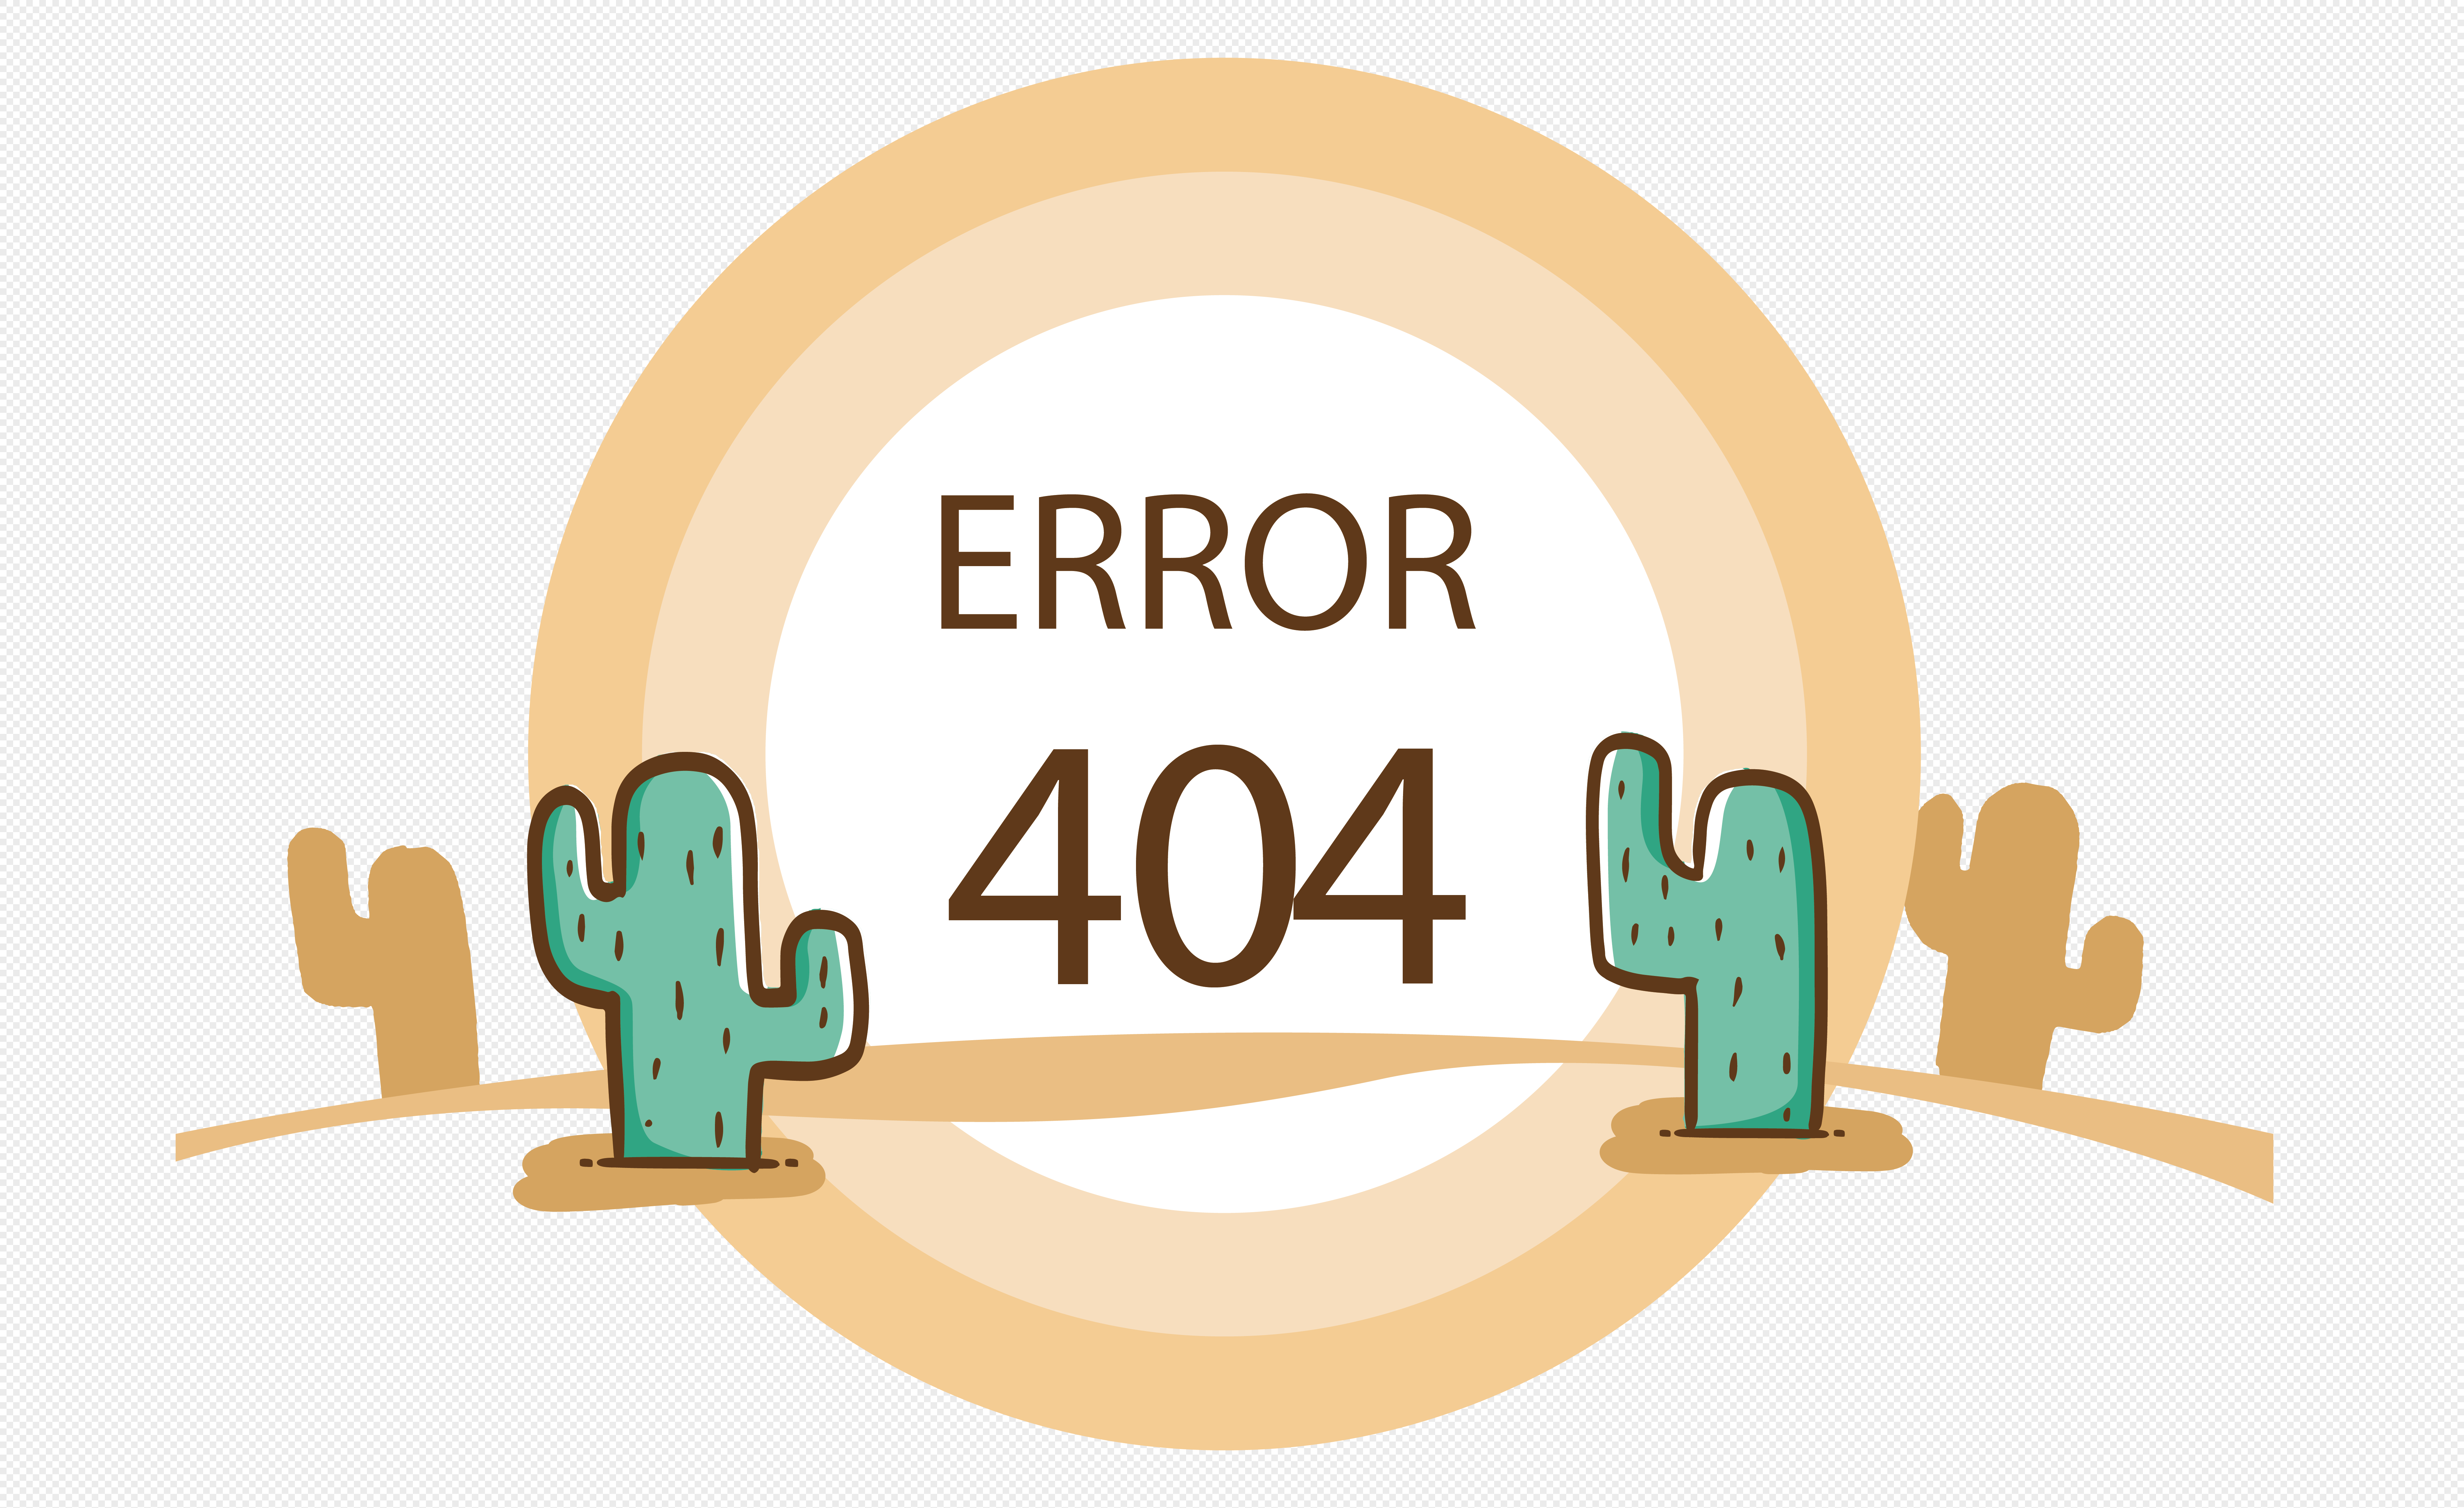 404 Page Error Png Image picture Free Download 400217866 lovepik